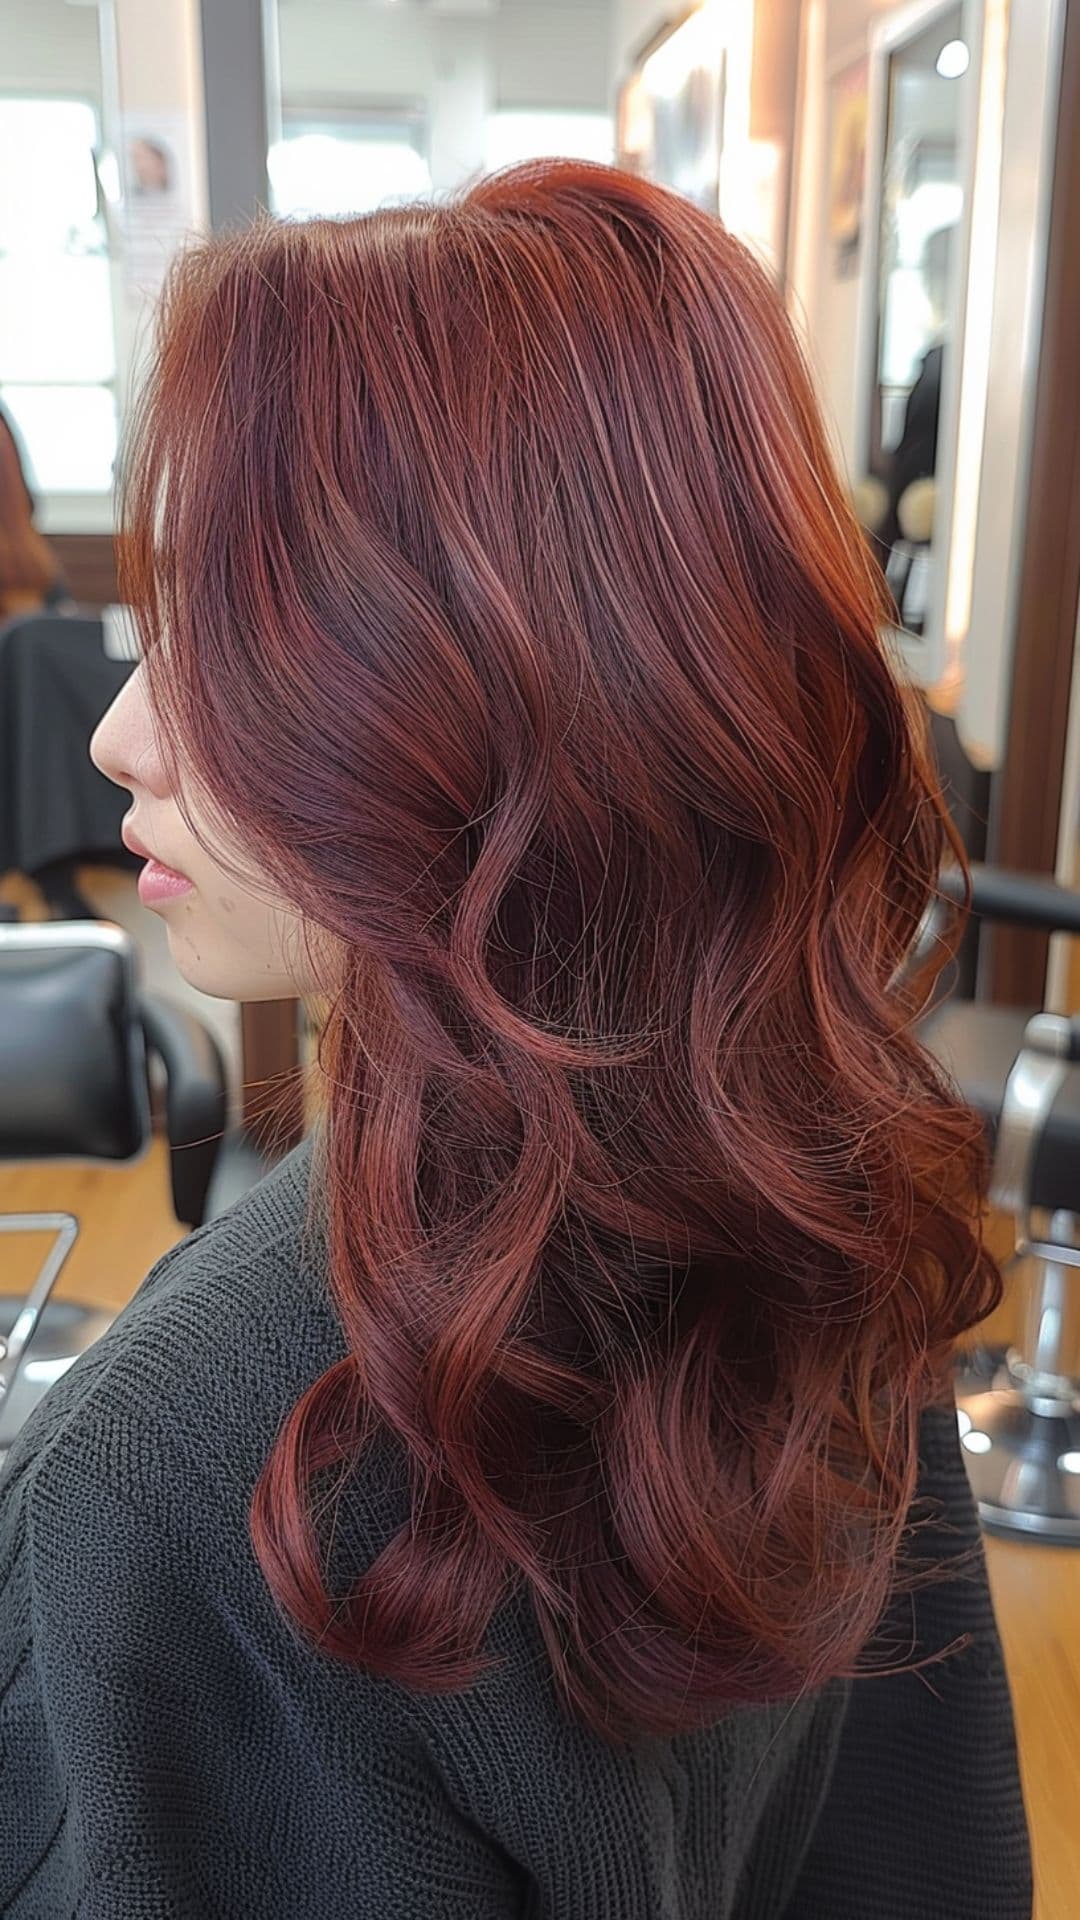 A woman modelling a mulled wine hair color.